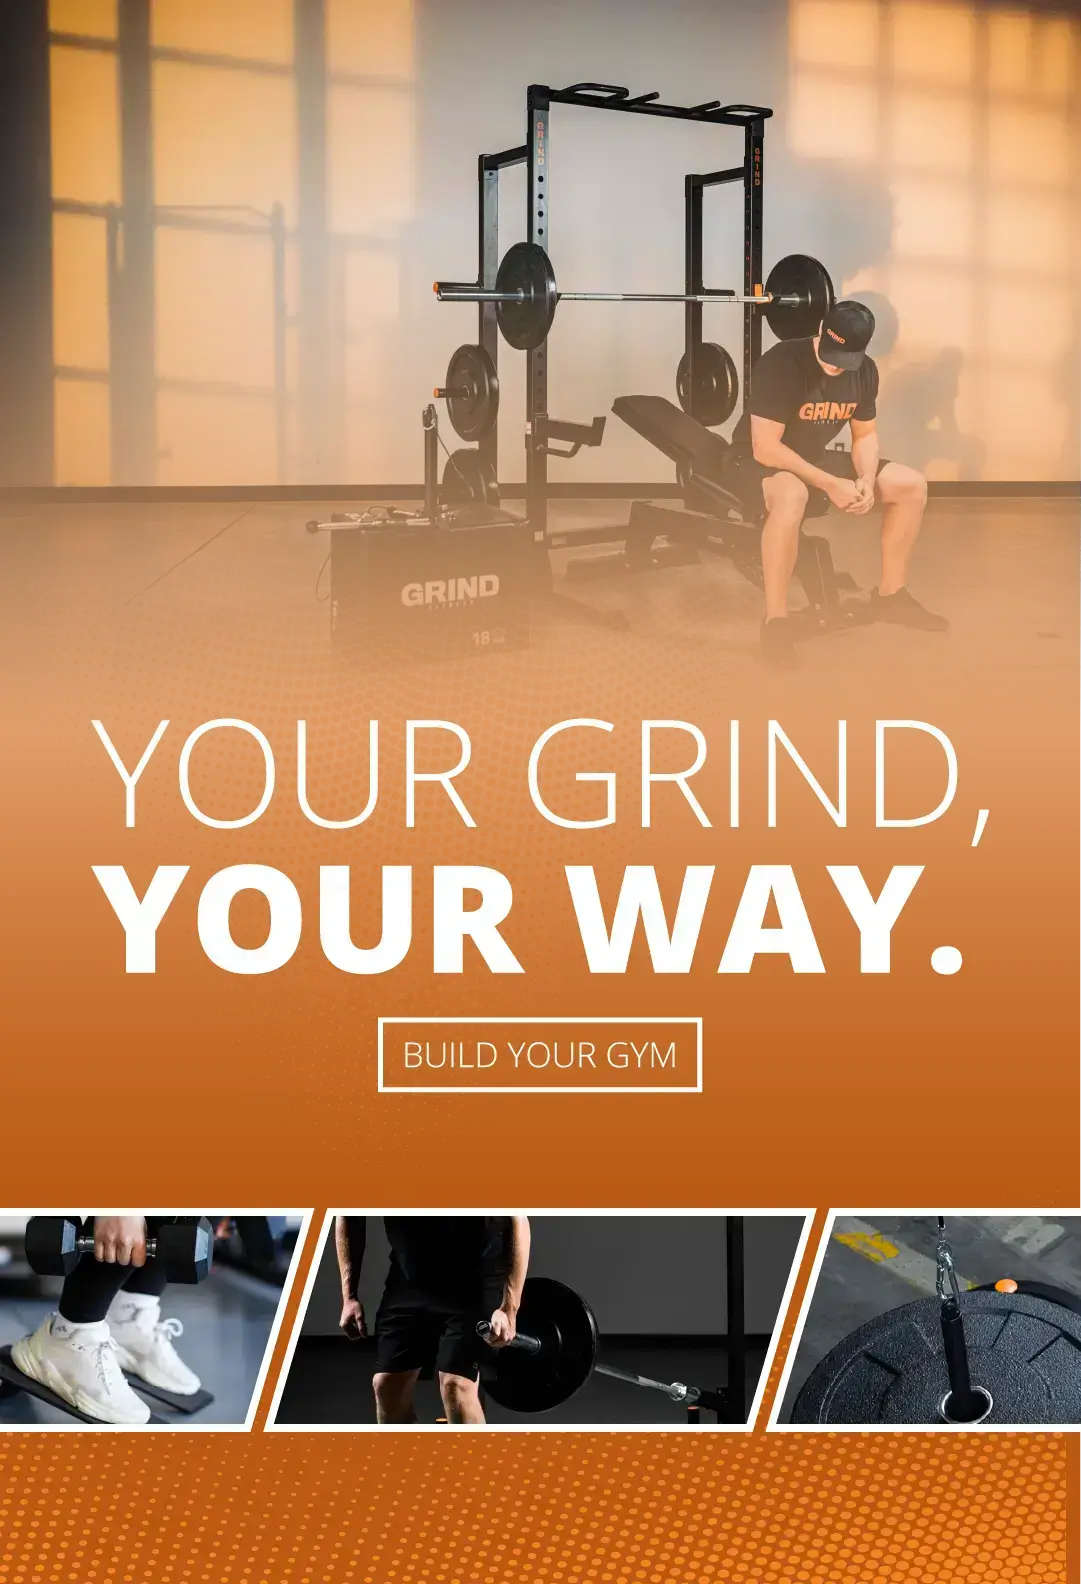 GRIND Fitness - It Only Works if You GRIND –